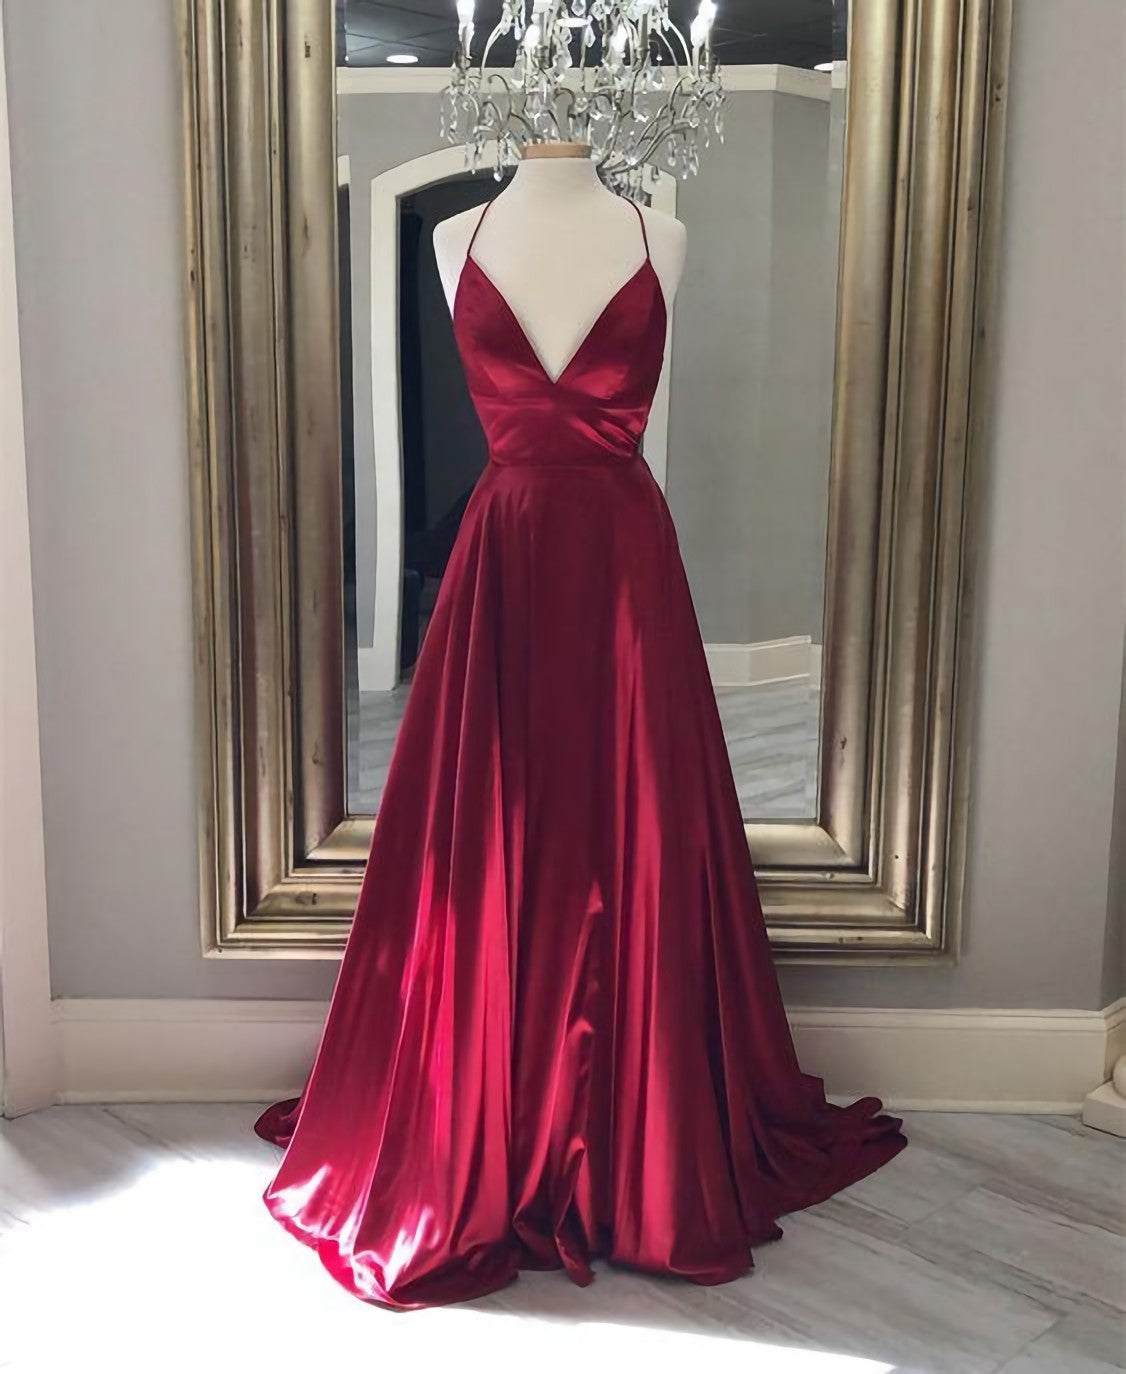 Evening Dresses For Over 56S, Spaghetti Straps Evening Gowns Dark Red Long Prom Dresses